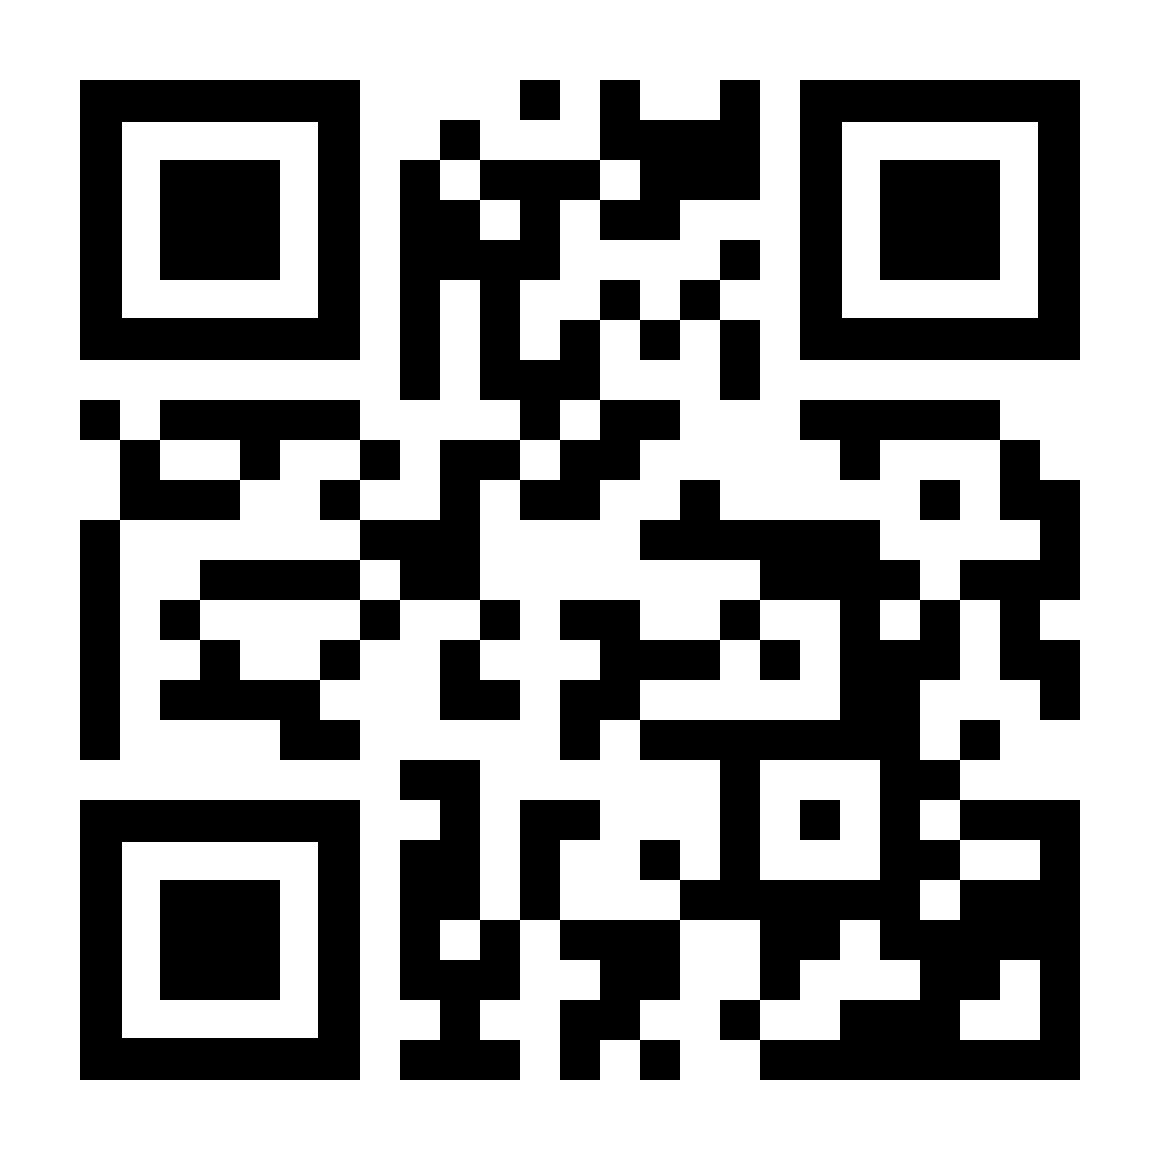 Scan this QR code with your mobile device